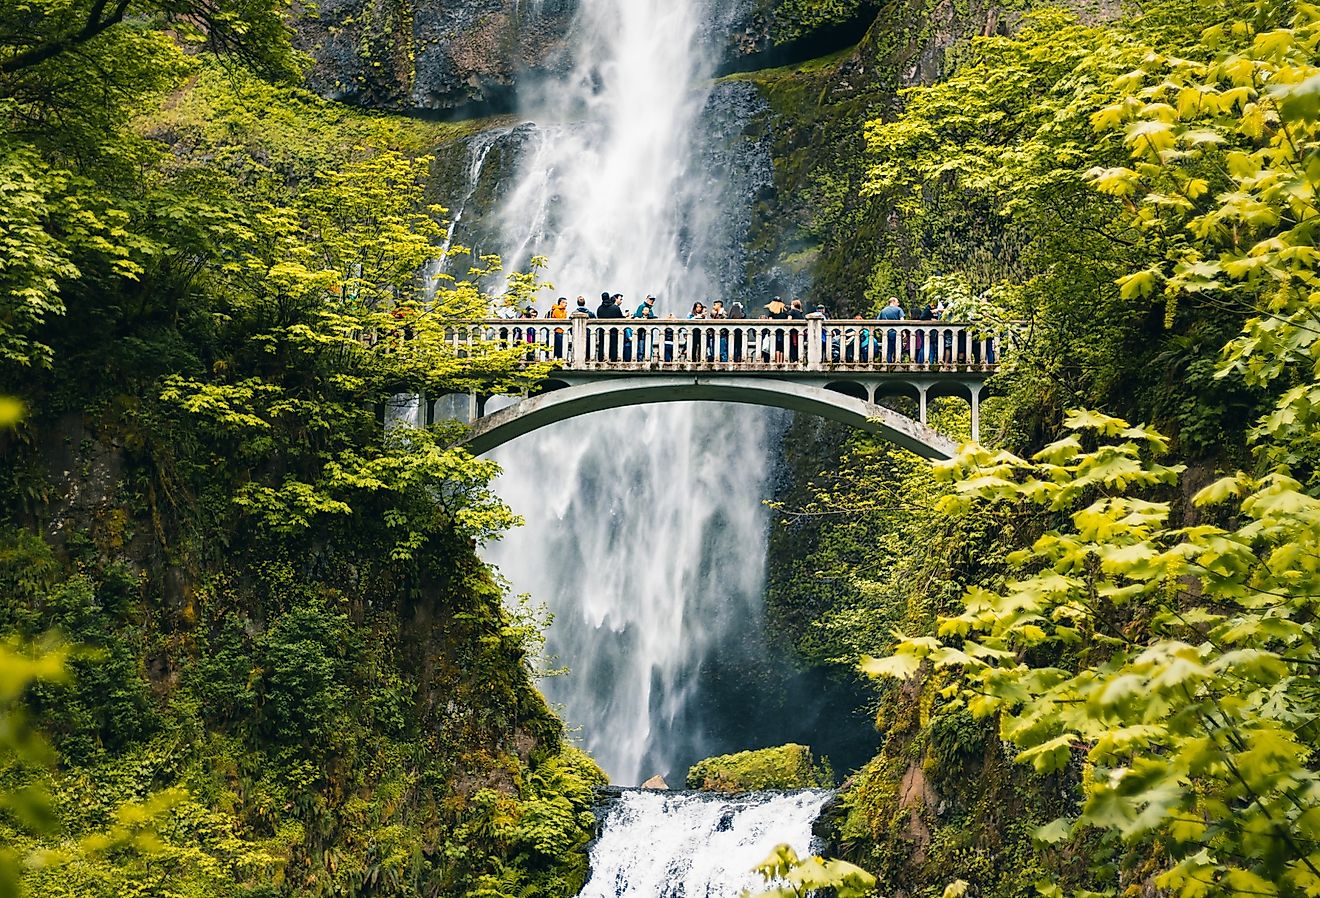 Multnomah Falls, the most visited natural recreation site in the Pacific Northwest, Columbia River Gorge National Scenic Area, Oregon.